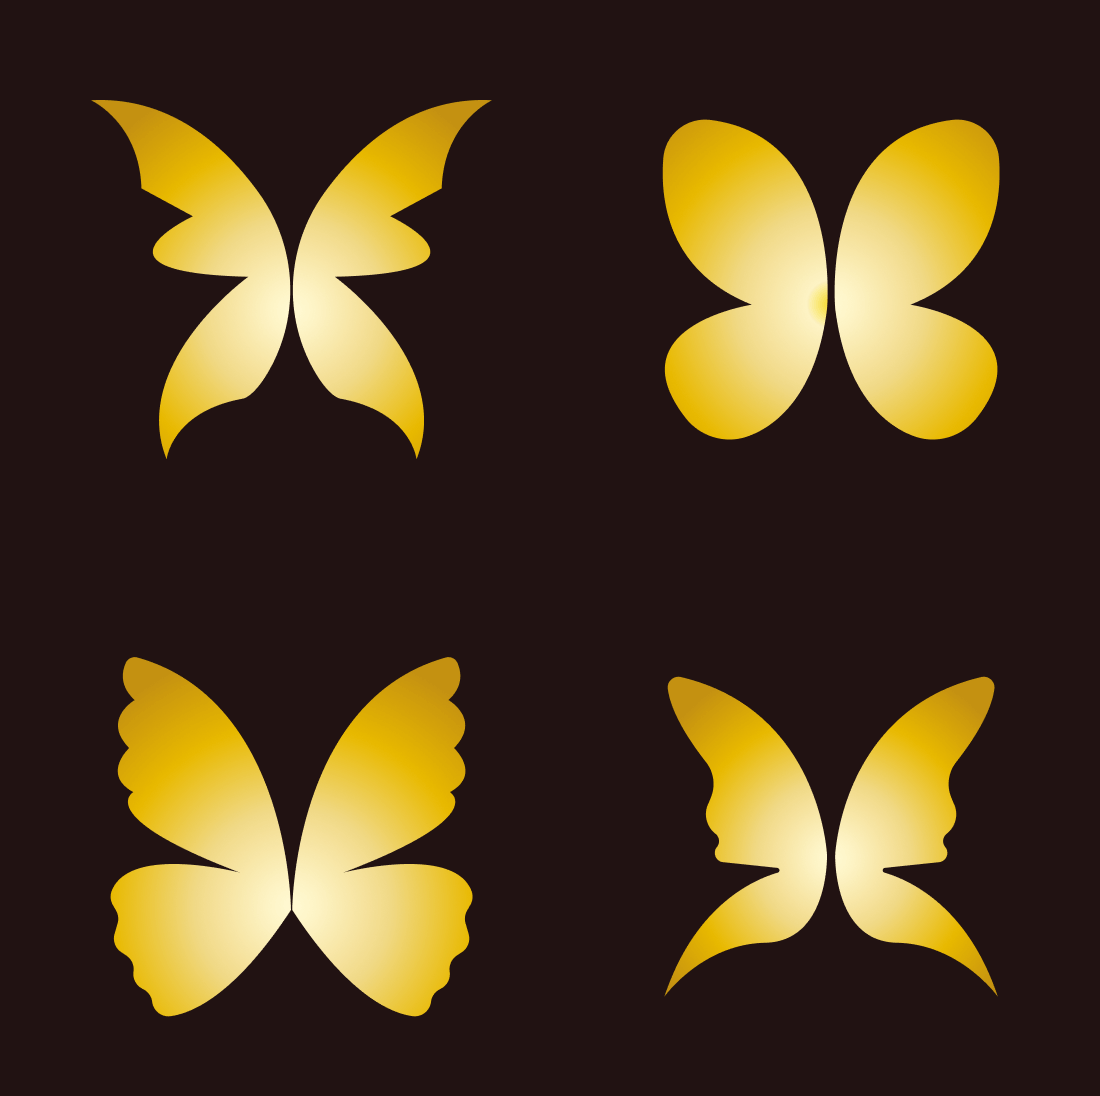 Set of four yellow butterflies on a black background.